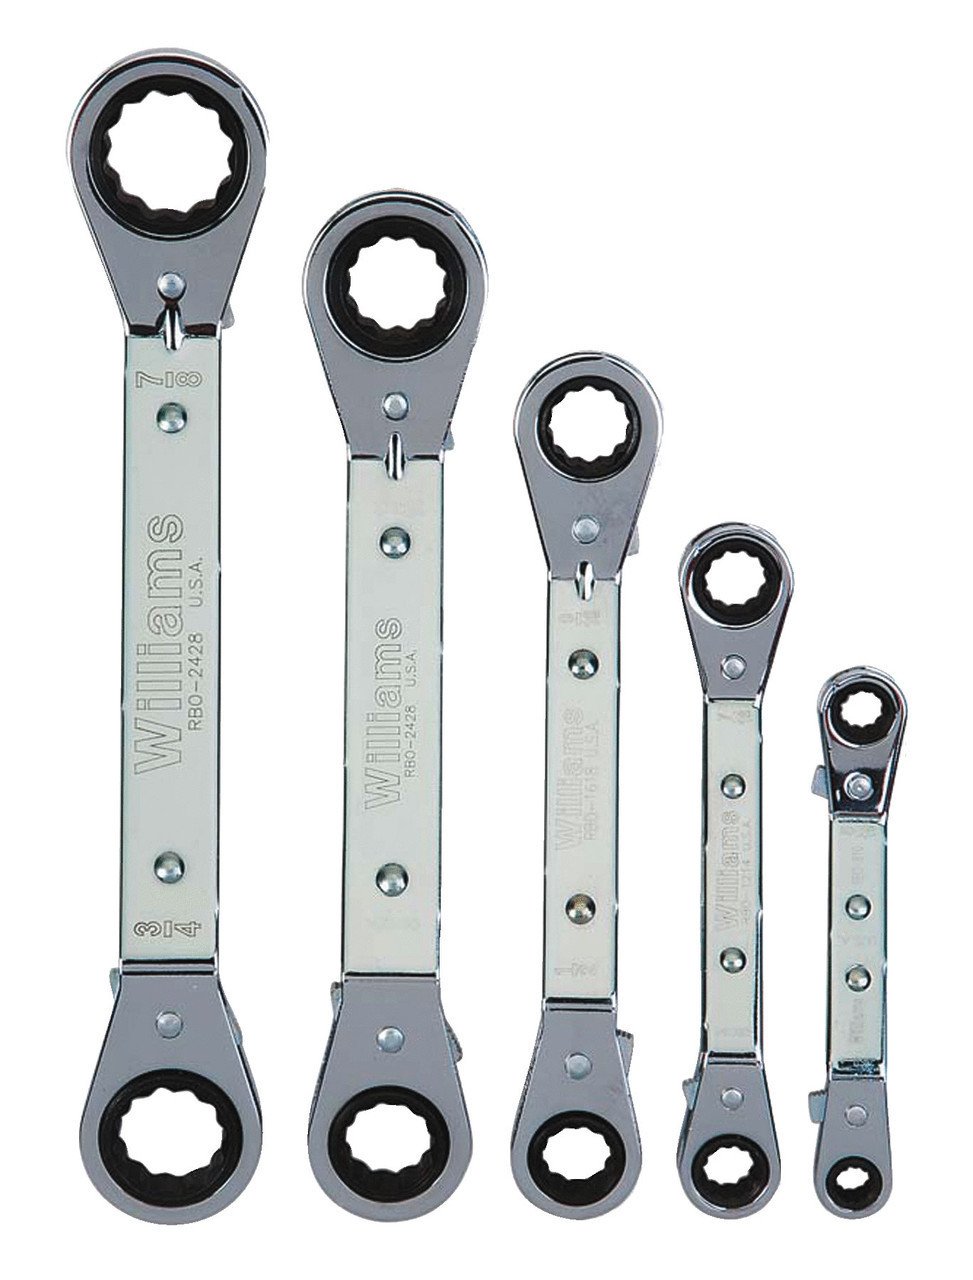 1/4x5/16"-3/4x7/8" Williams Polished Chrome Reversible Offset Ratcheting Box Wrench Set 5 Pcs in Pouch 12 PT - JHWWS-5